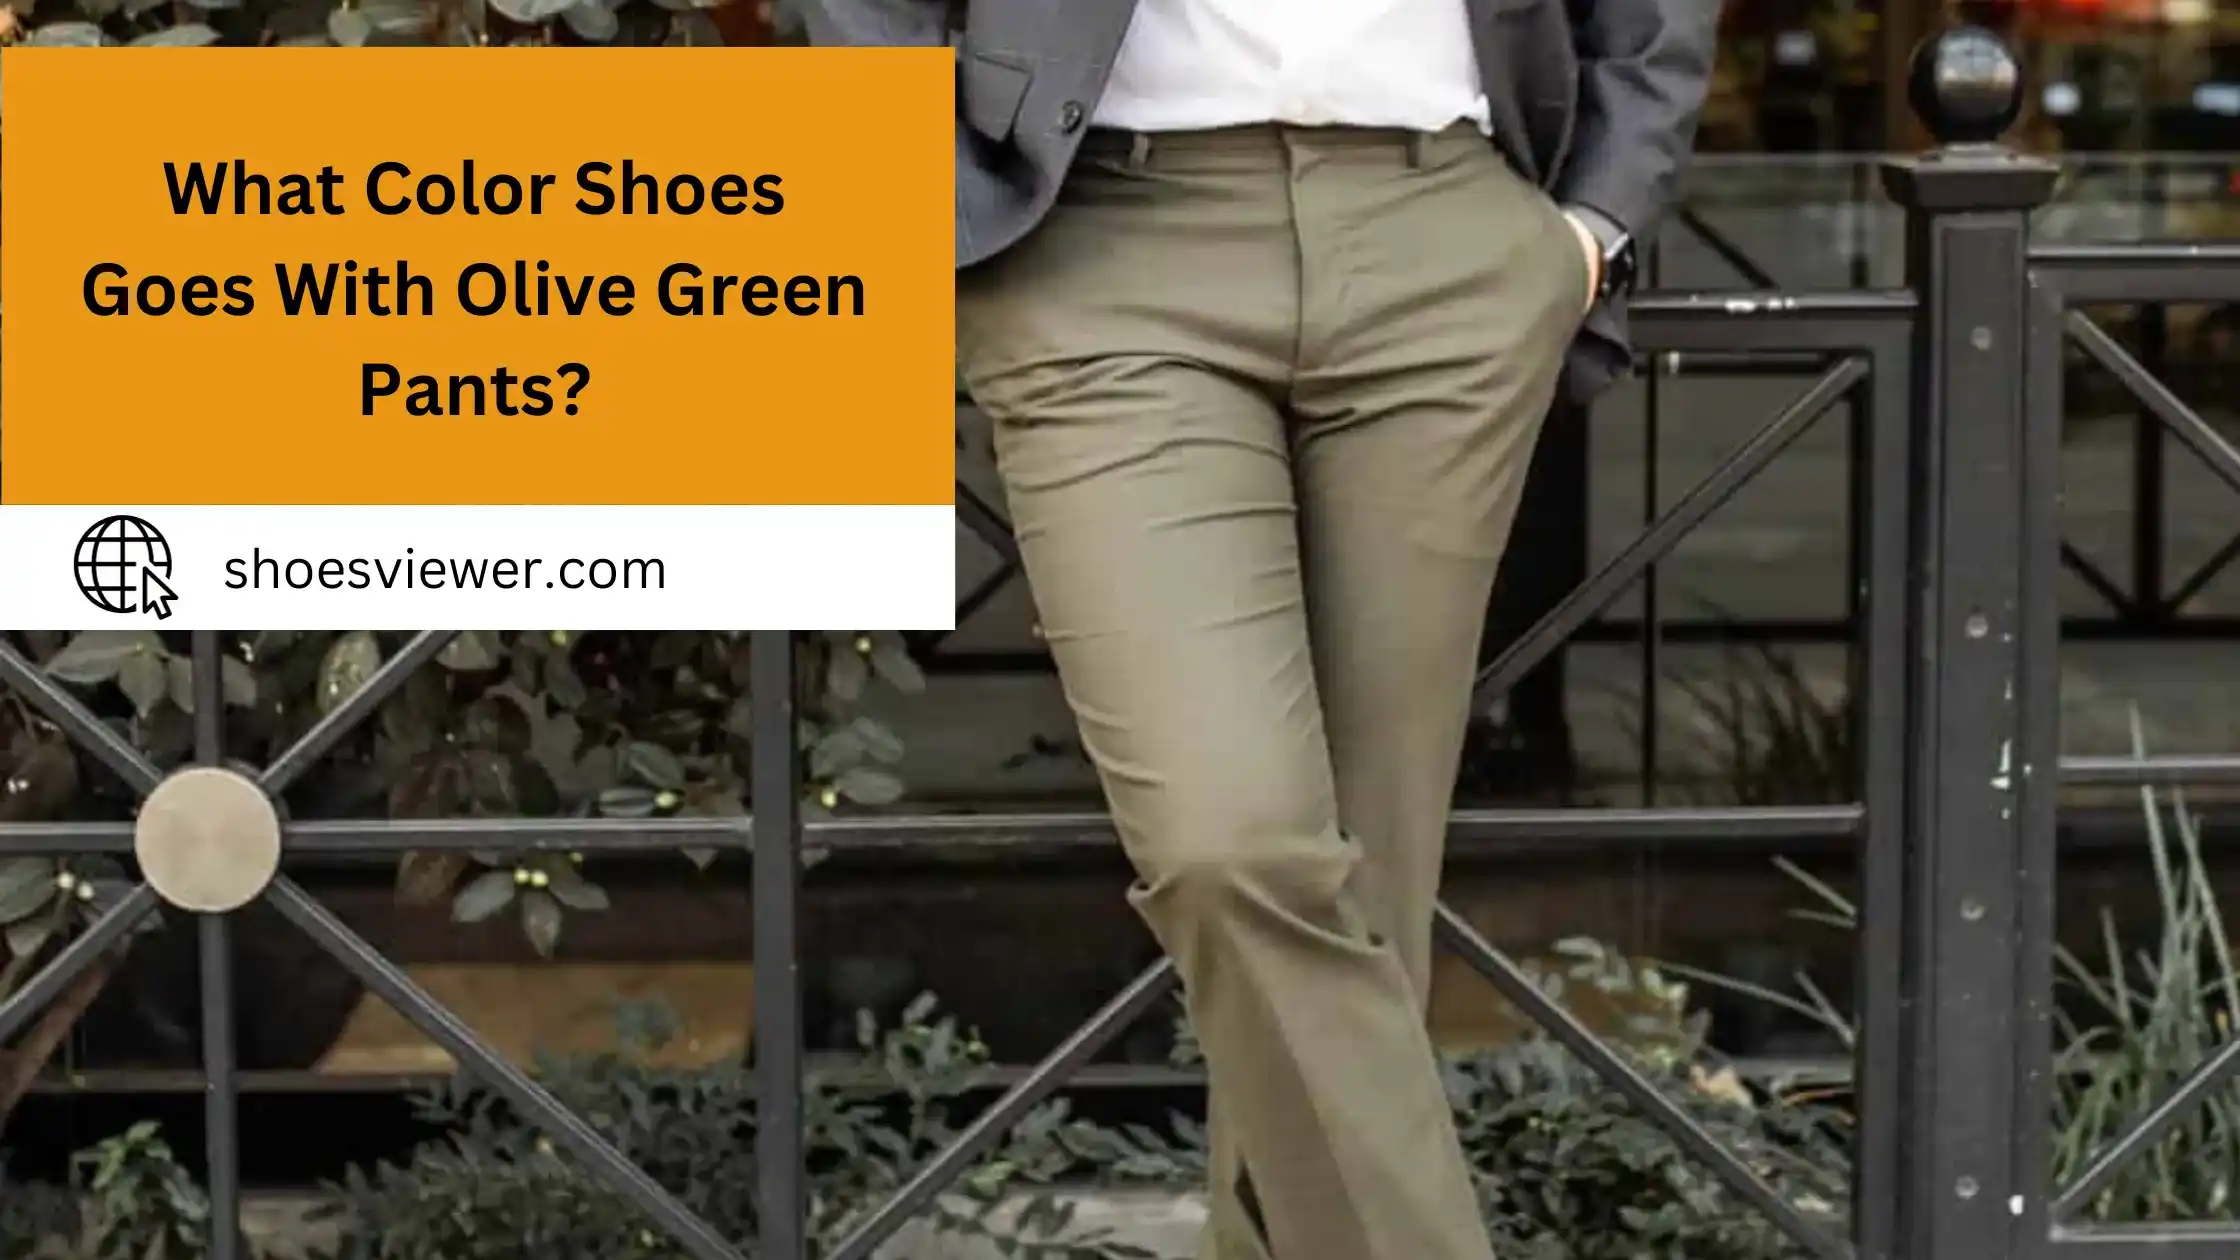 What Color Shoes Goes With Olive Green Pants? Expert Choice